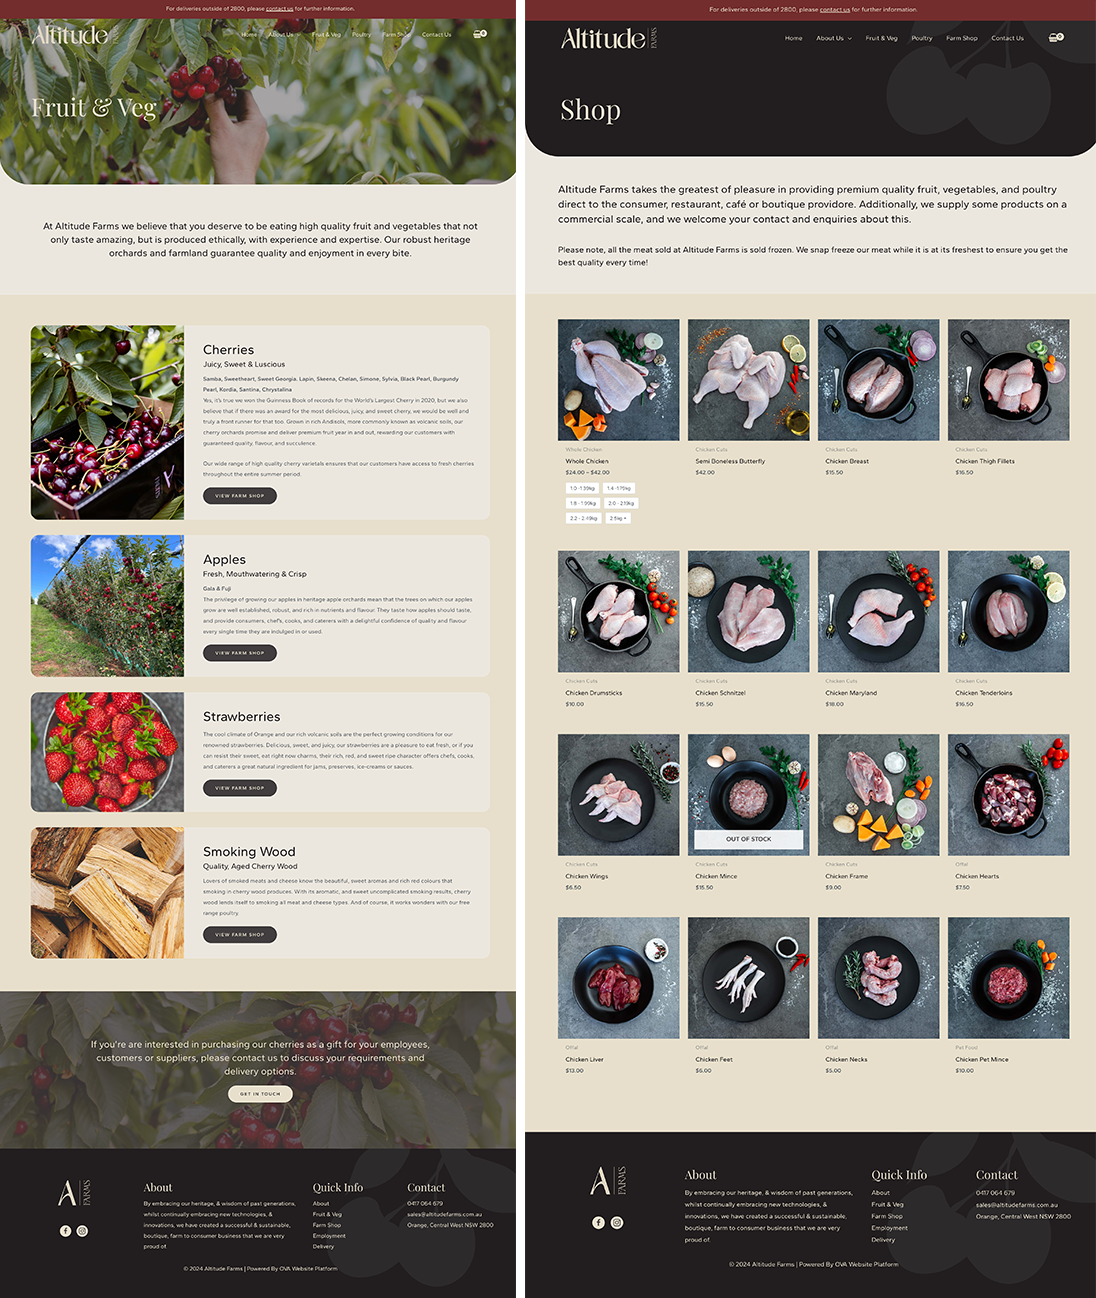 Screenshot of the Fruit & Veg and Shop pages on the Altitude Farms website.